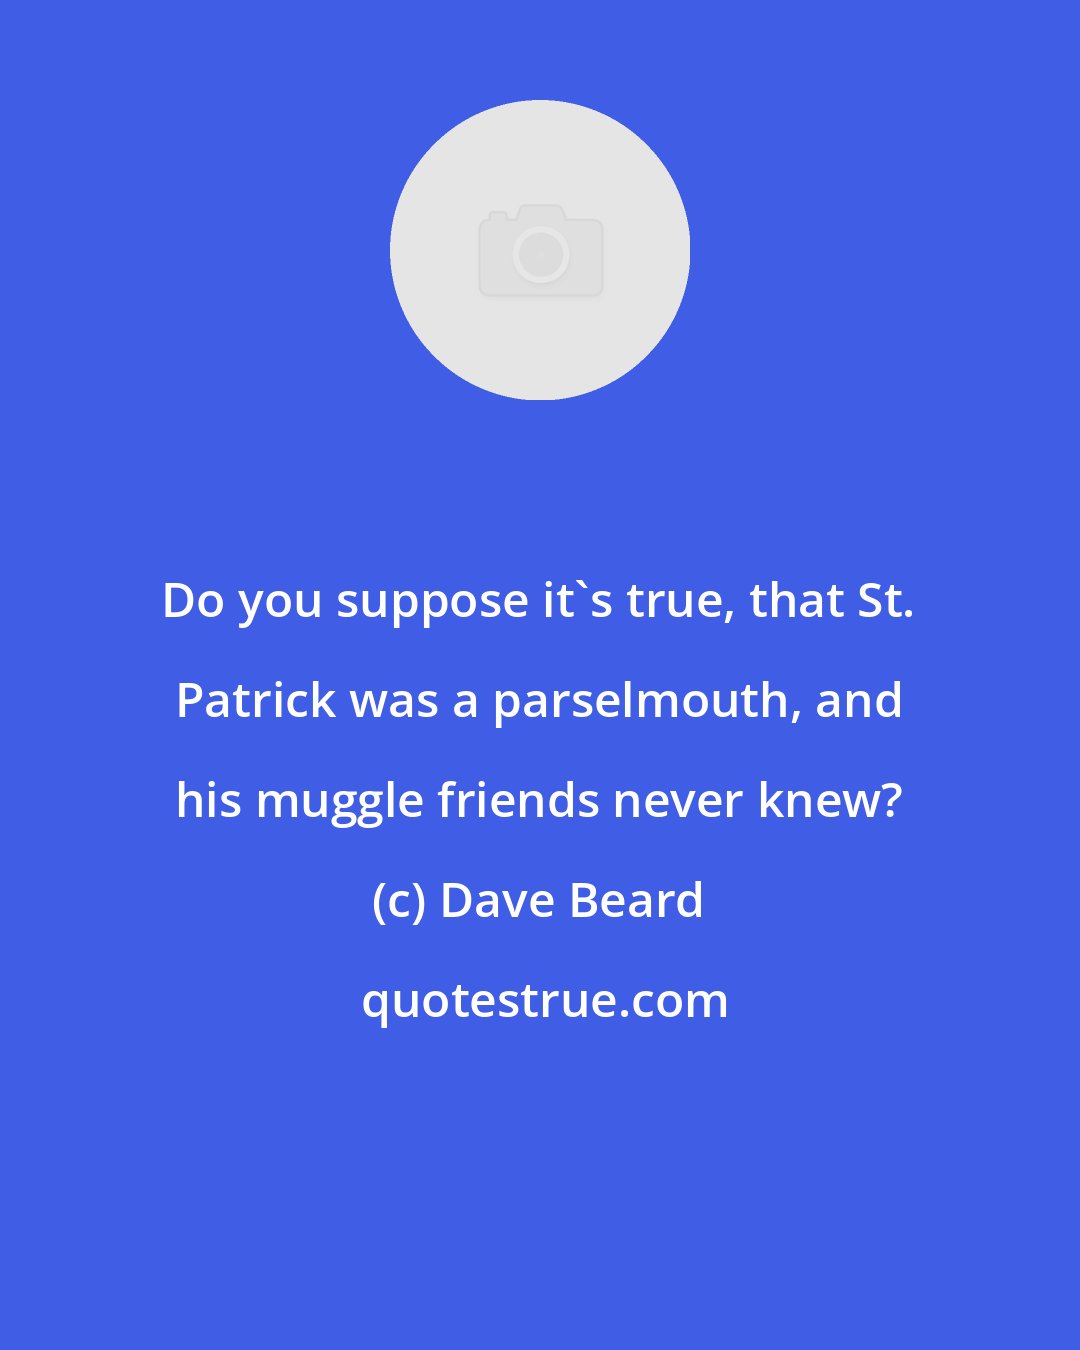 Dave Beard: Do you suppose it's true, that St. Patrick was a parselmouth, and his muggle friends never knew?